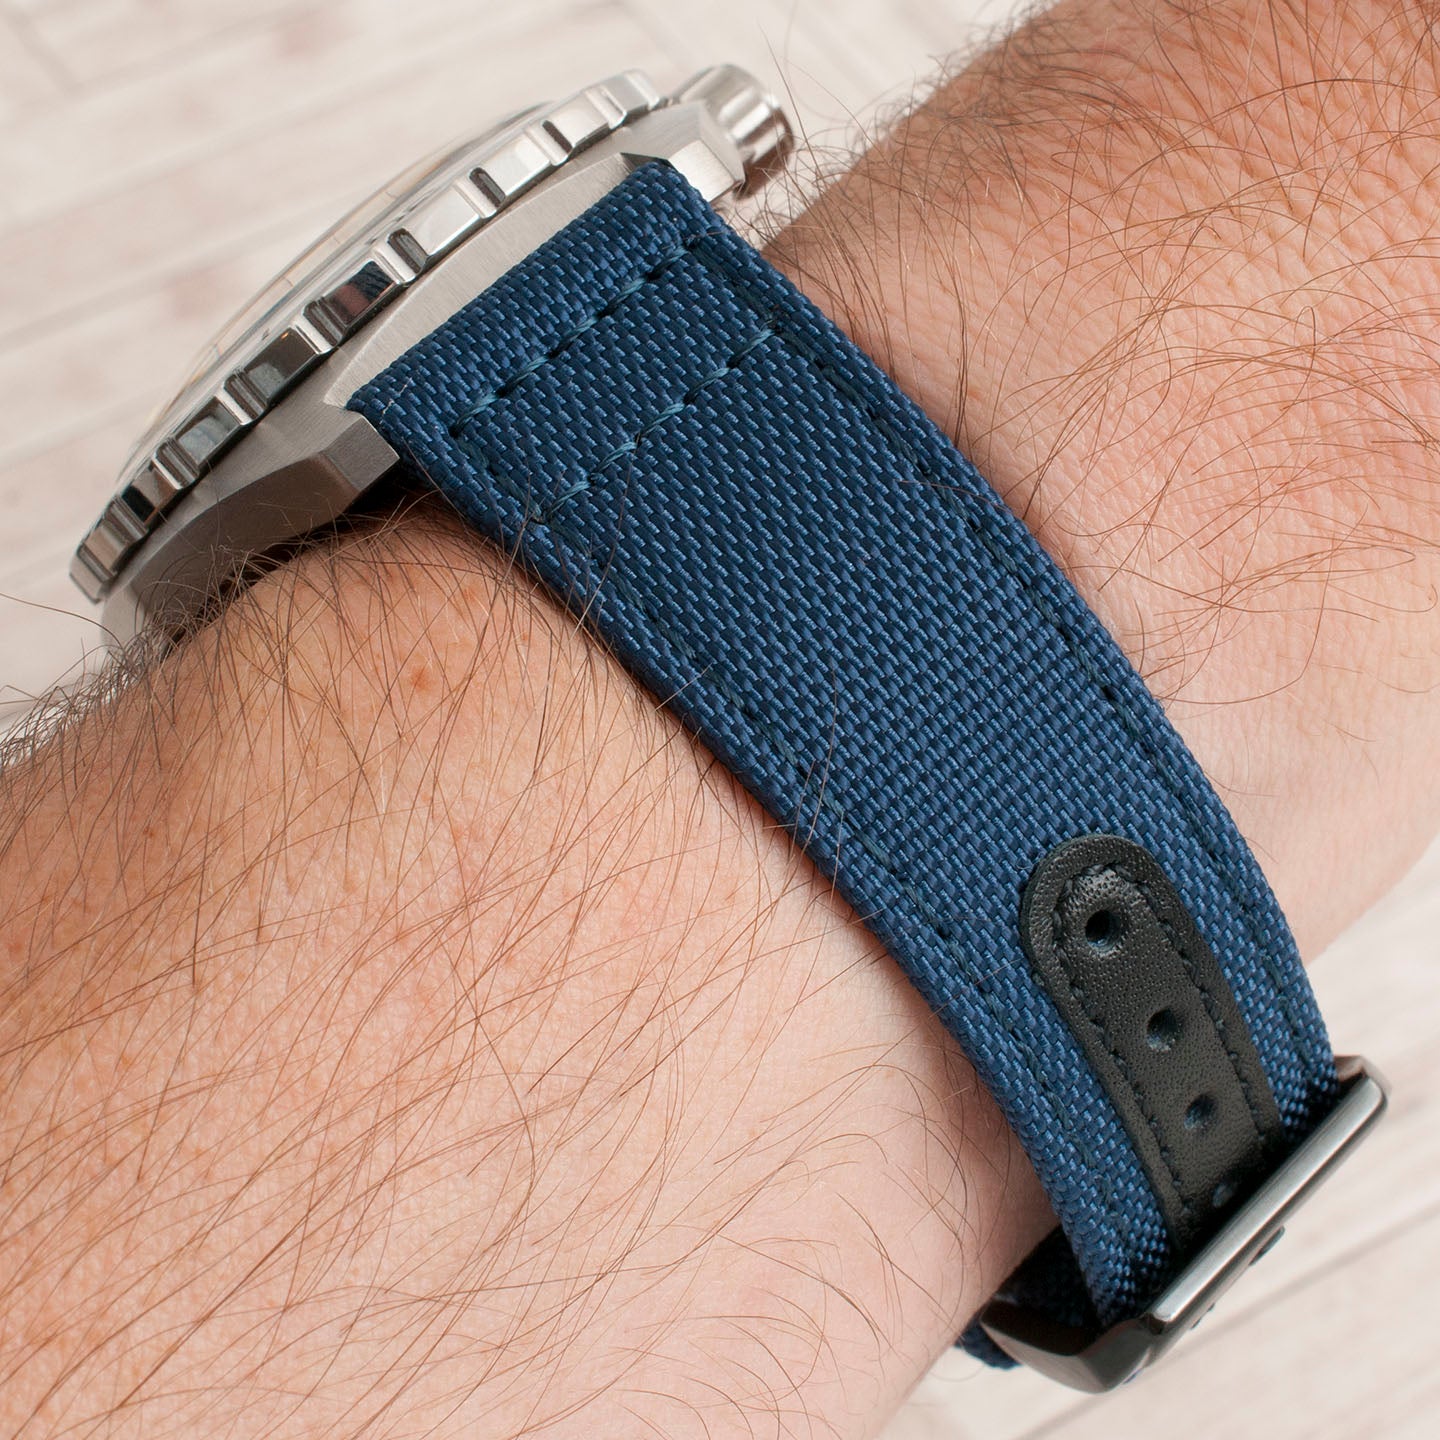 Premium Sailcloth quick release watch strap band replacement 19mm, 20mm, 21mm, 22mm blue with black buckle